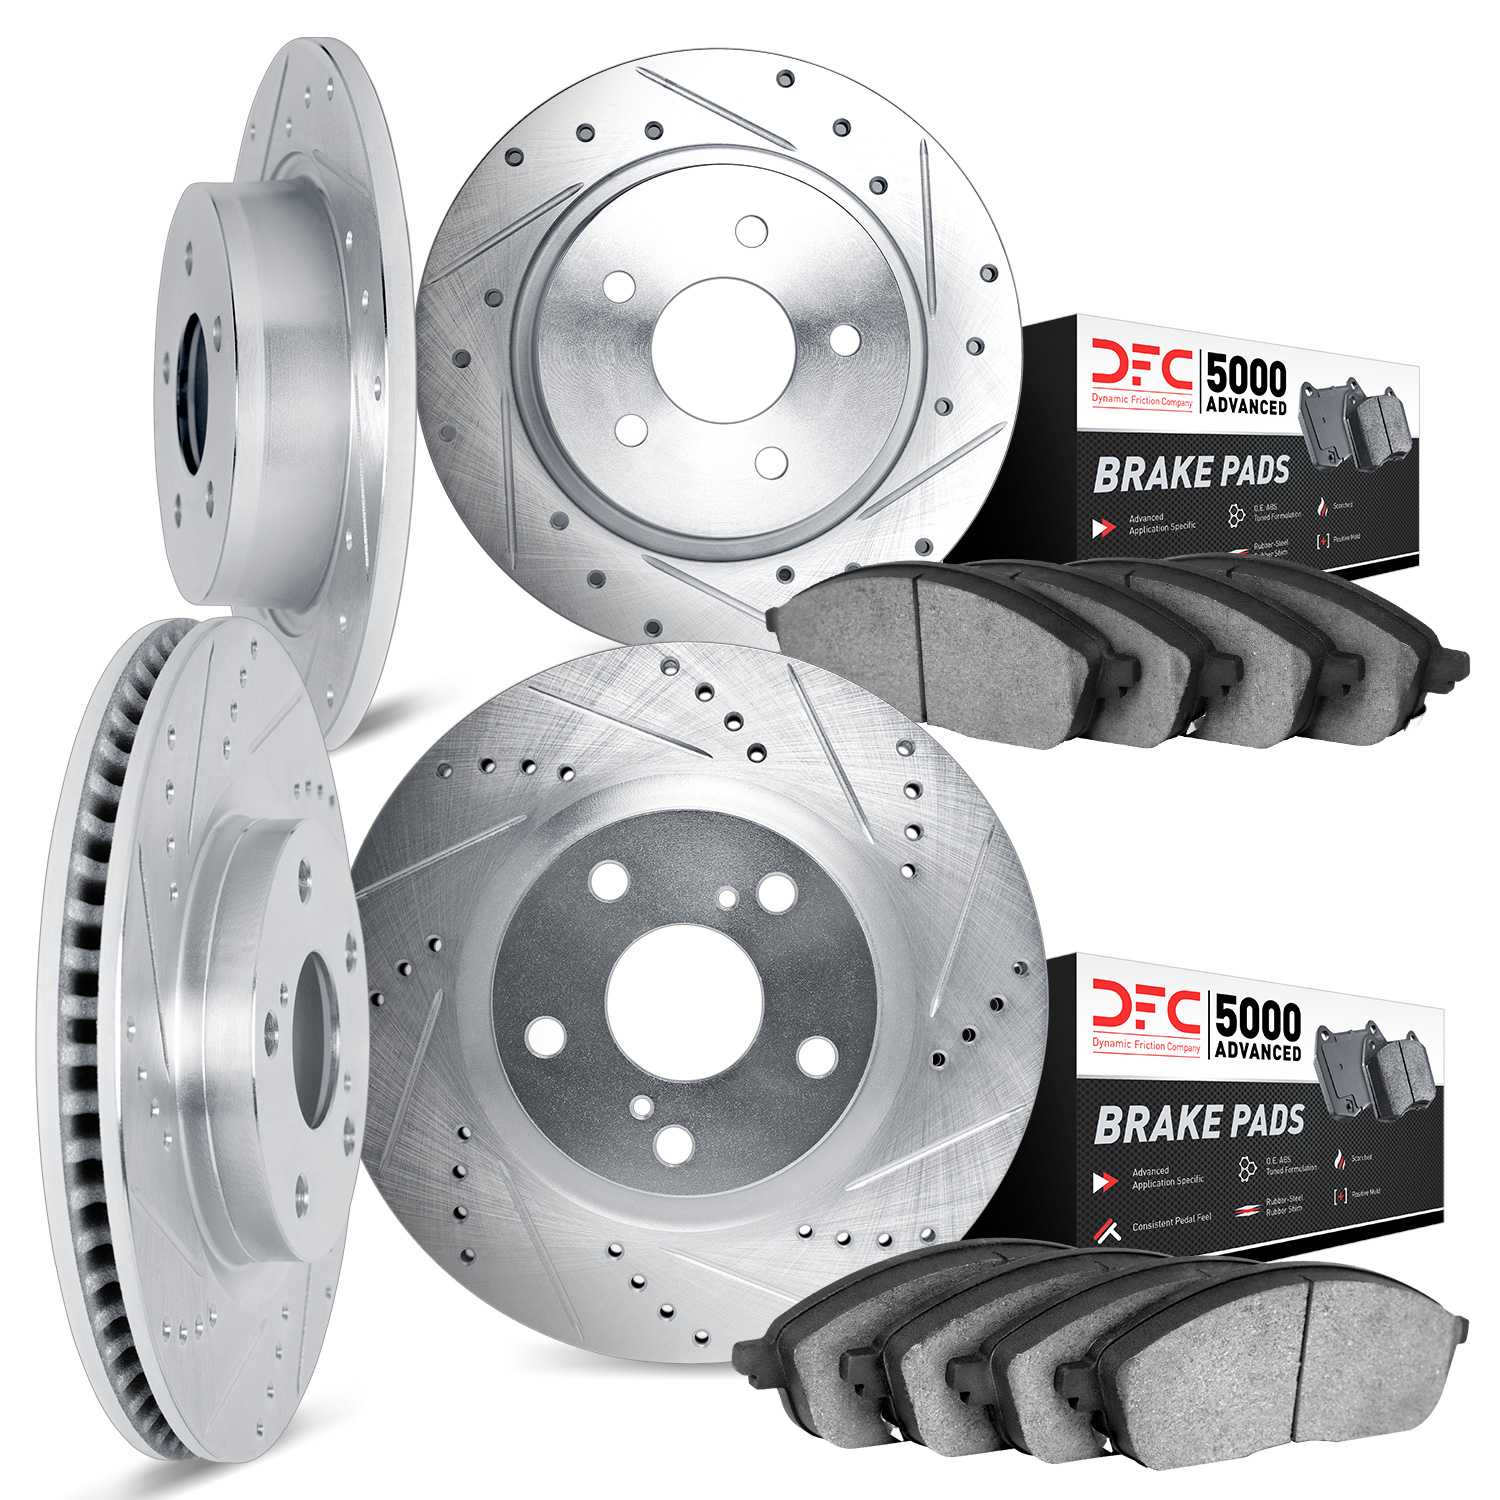 7504-40221 Drilled/Slotted Brake Rotors w/5000 Advanced Brake Pads Kit [Silver], 1991-1992 Mopar, Position: Front and Rear